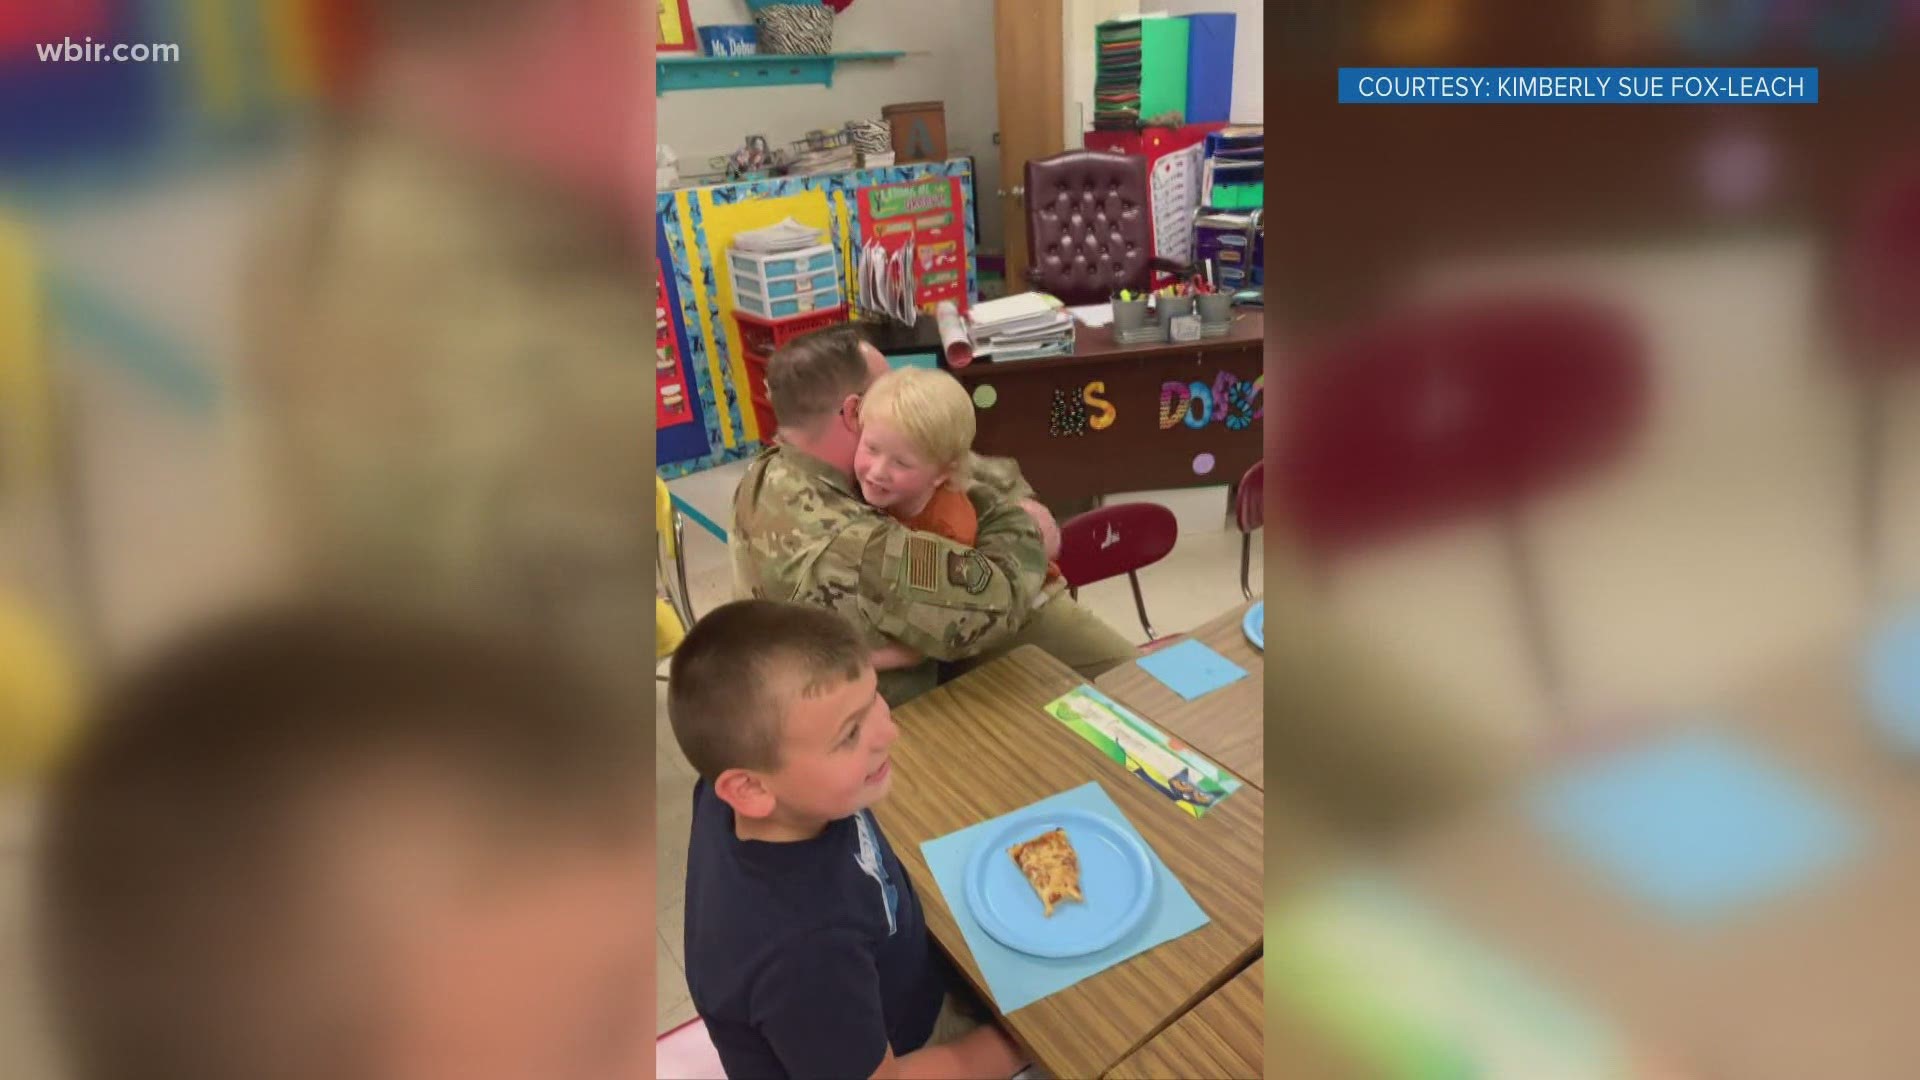 The father made his way home just in time to surprise his 6-year-old son Charlie as his class celebrated the end of the school year with a pizza party.